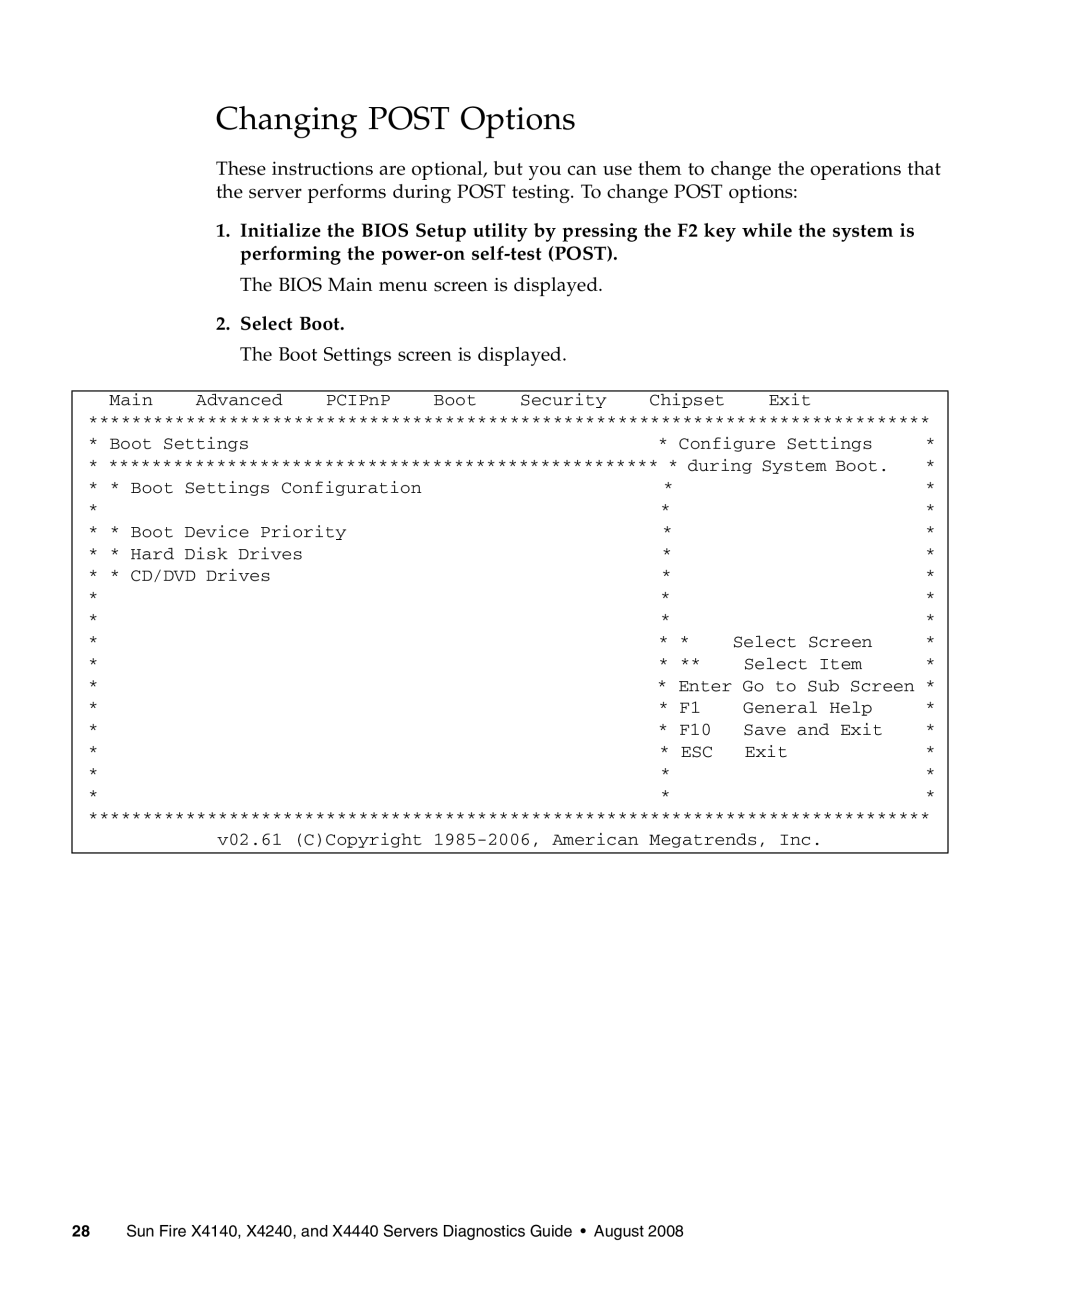 Sun Microsystems manual Changing POST Options, Sun Fire X4140, X4240, and X4440 Servers Diagnostics Guide August 